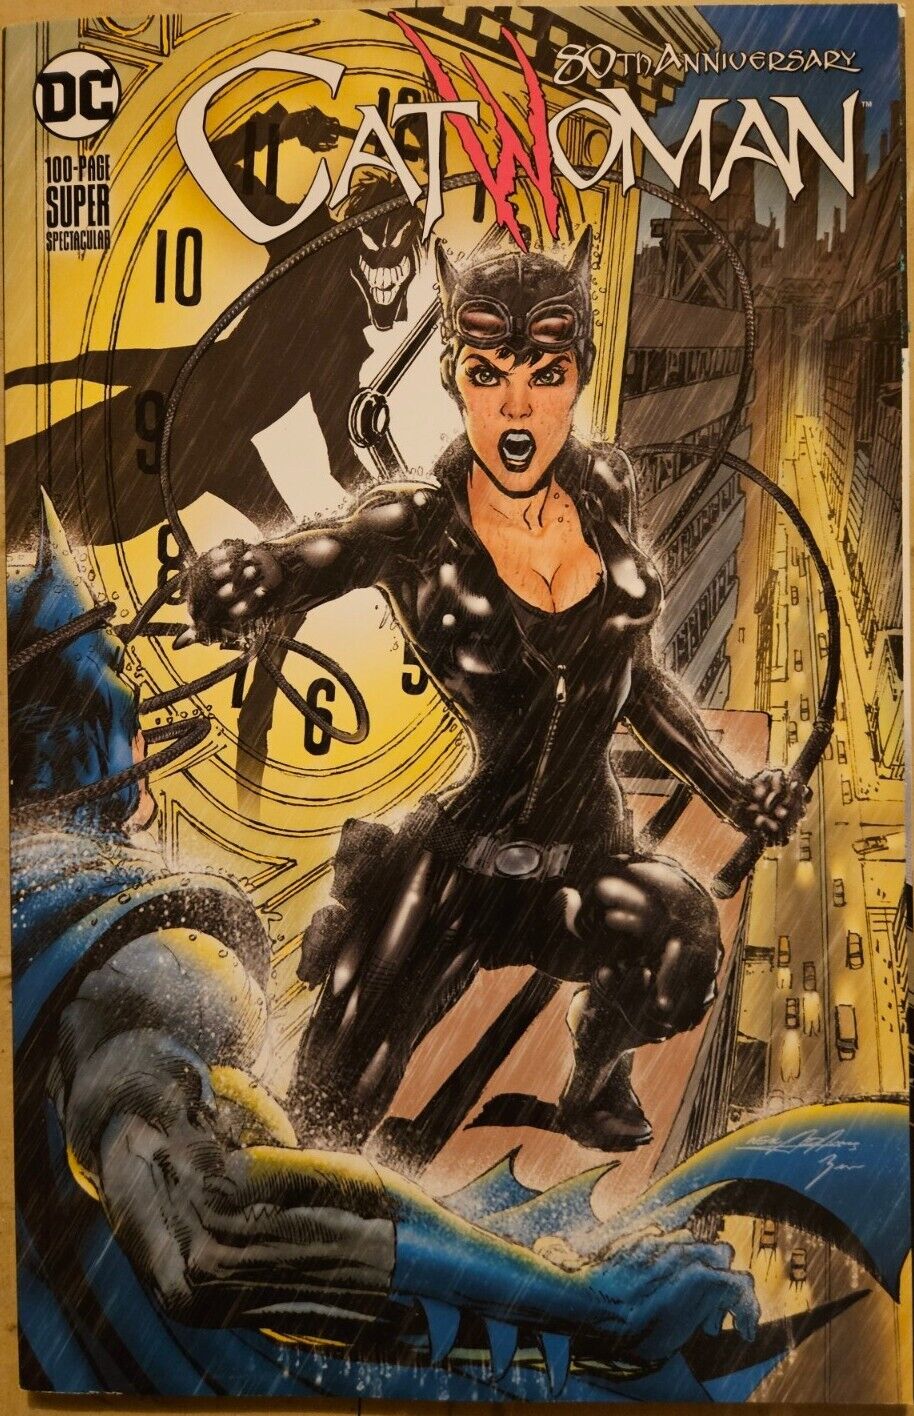 Catwoman 80th Anniversary 100 Page Super Spectacular Neal Adams New